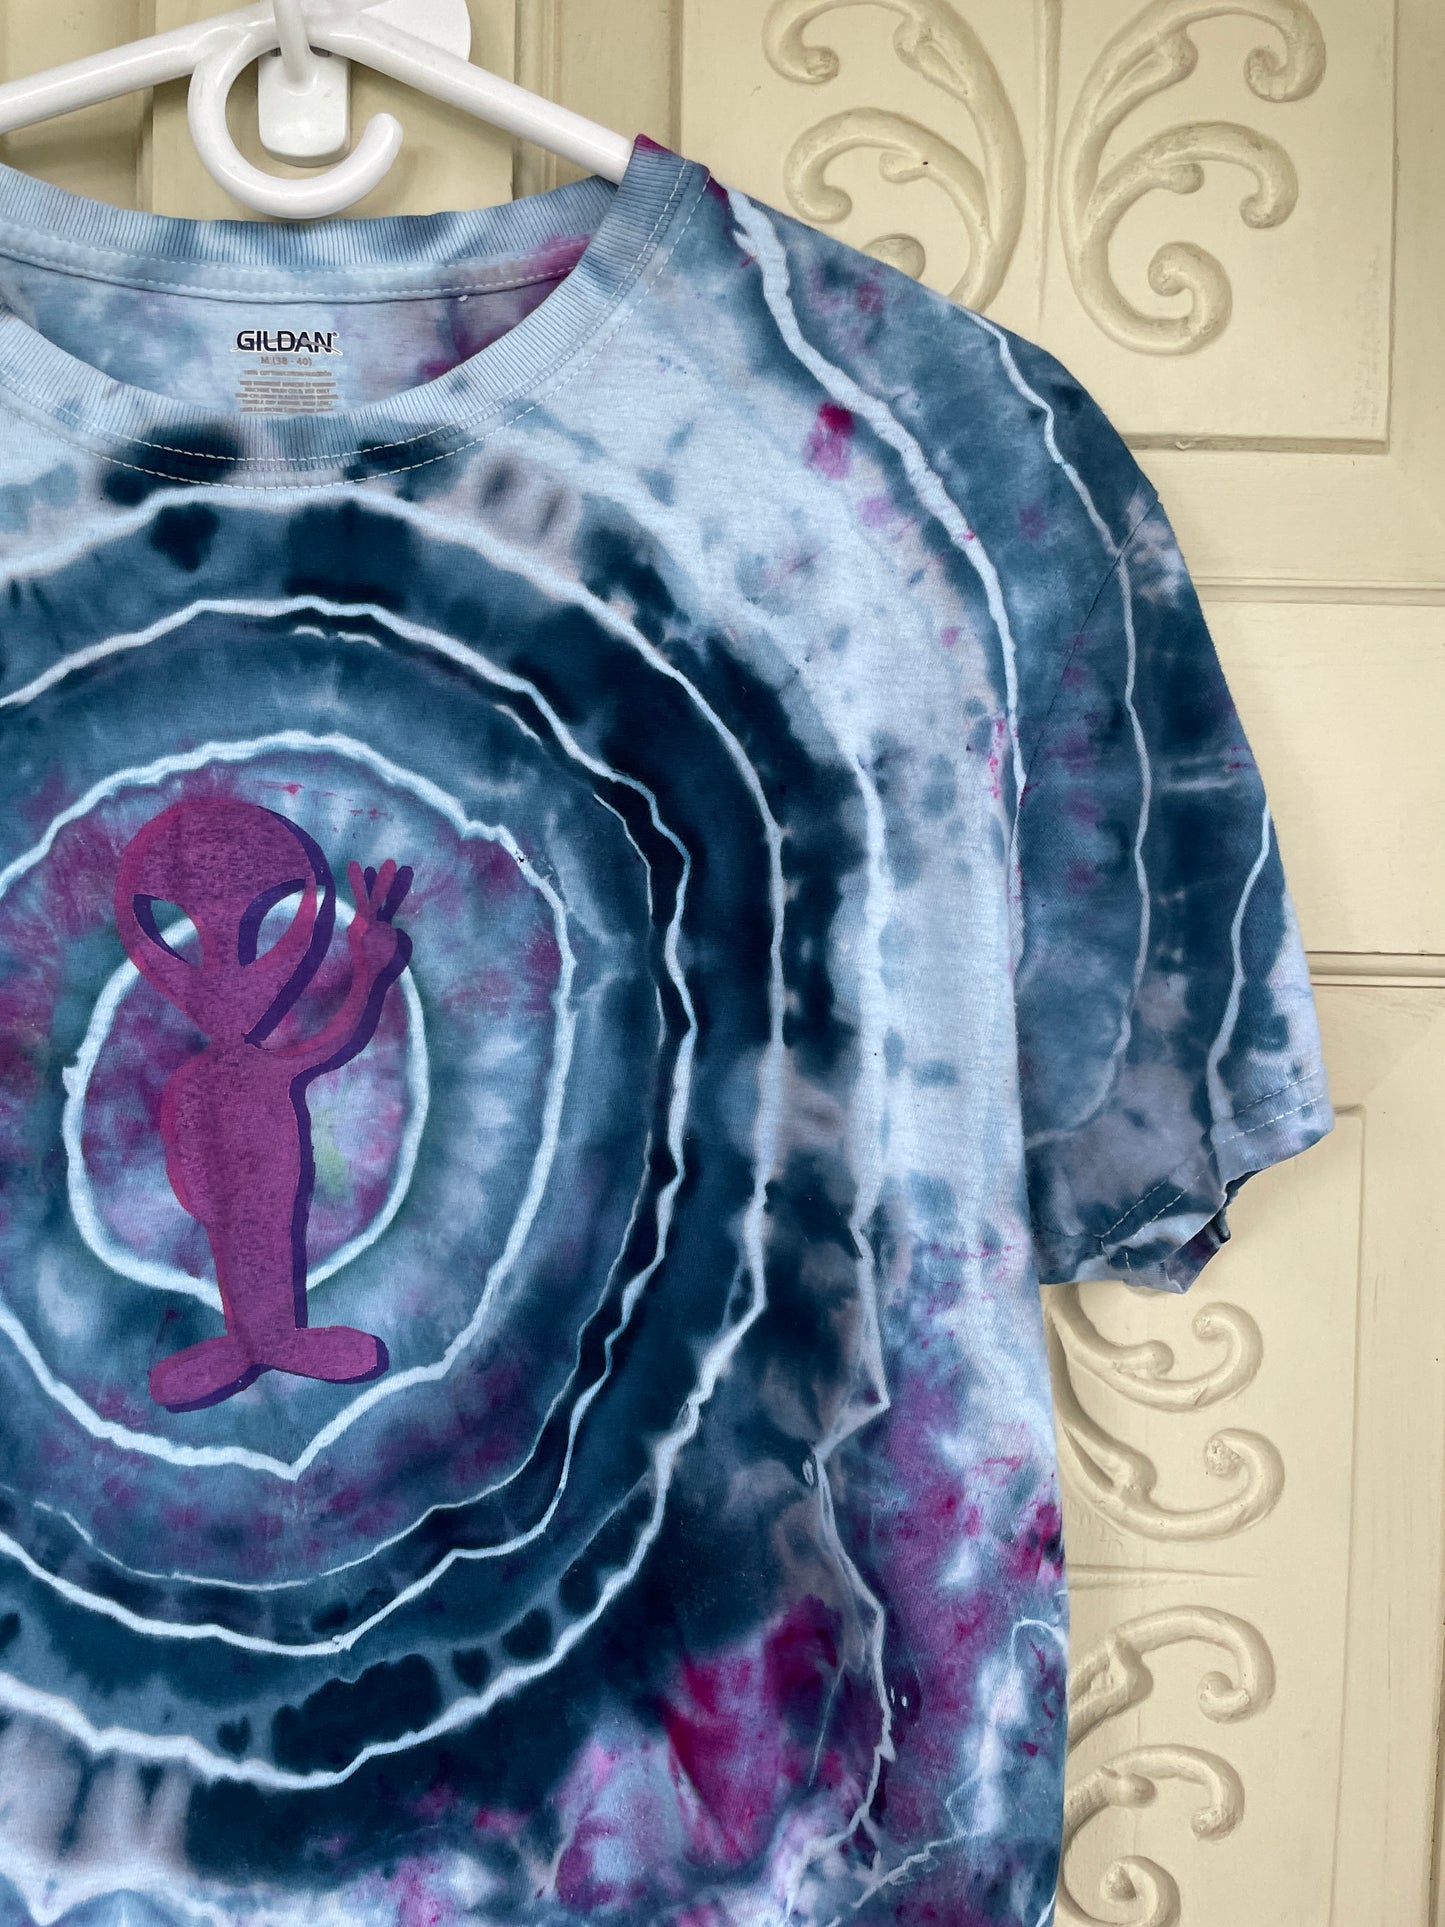 Medium Men's Groovy Alien Handmade Galaxy Geode Tie Dye T-Shirt | One-Of-a-Kind Upcycled Blue and White Short Sleeve Shirt